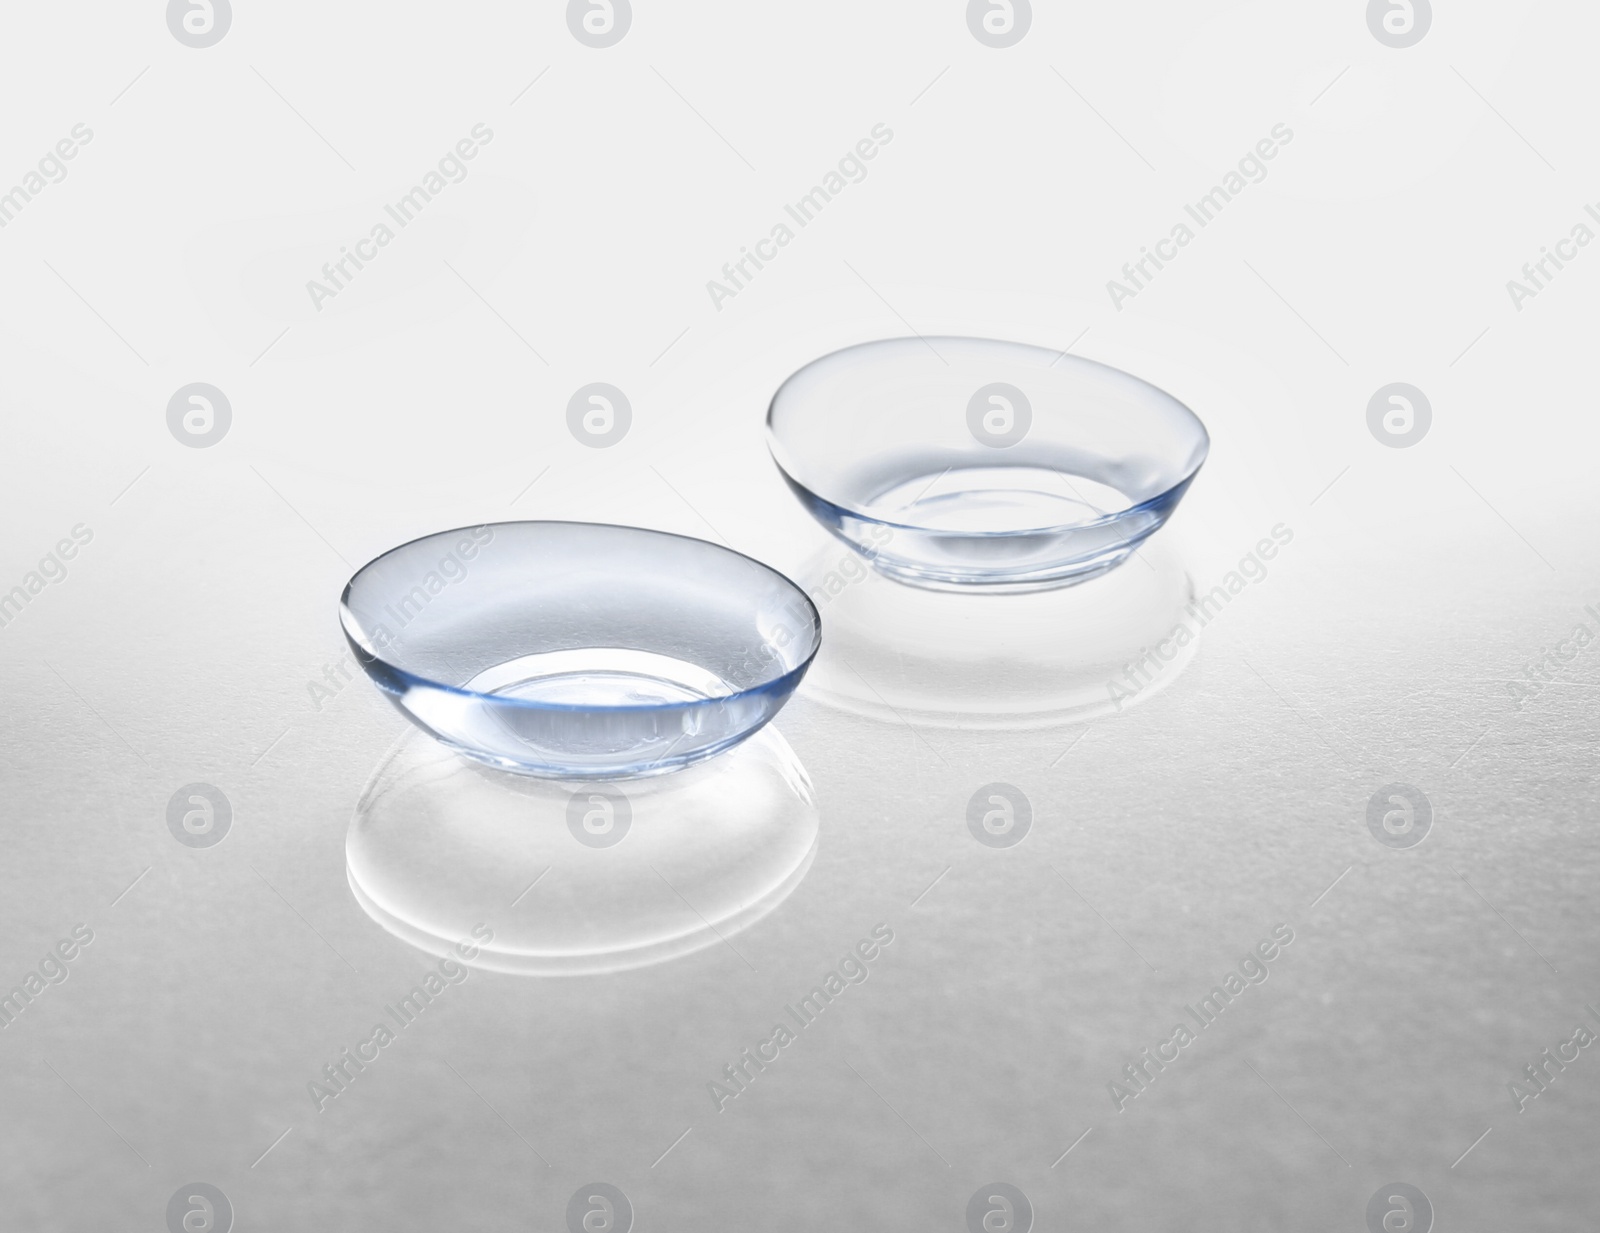 Photo of Contact lenses on light background